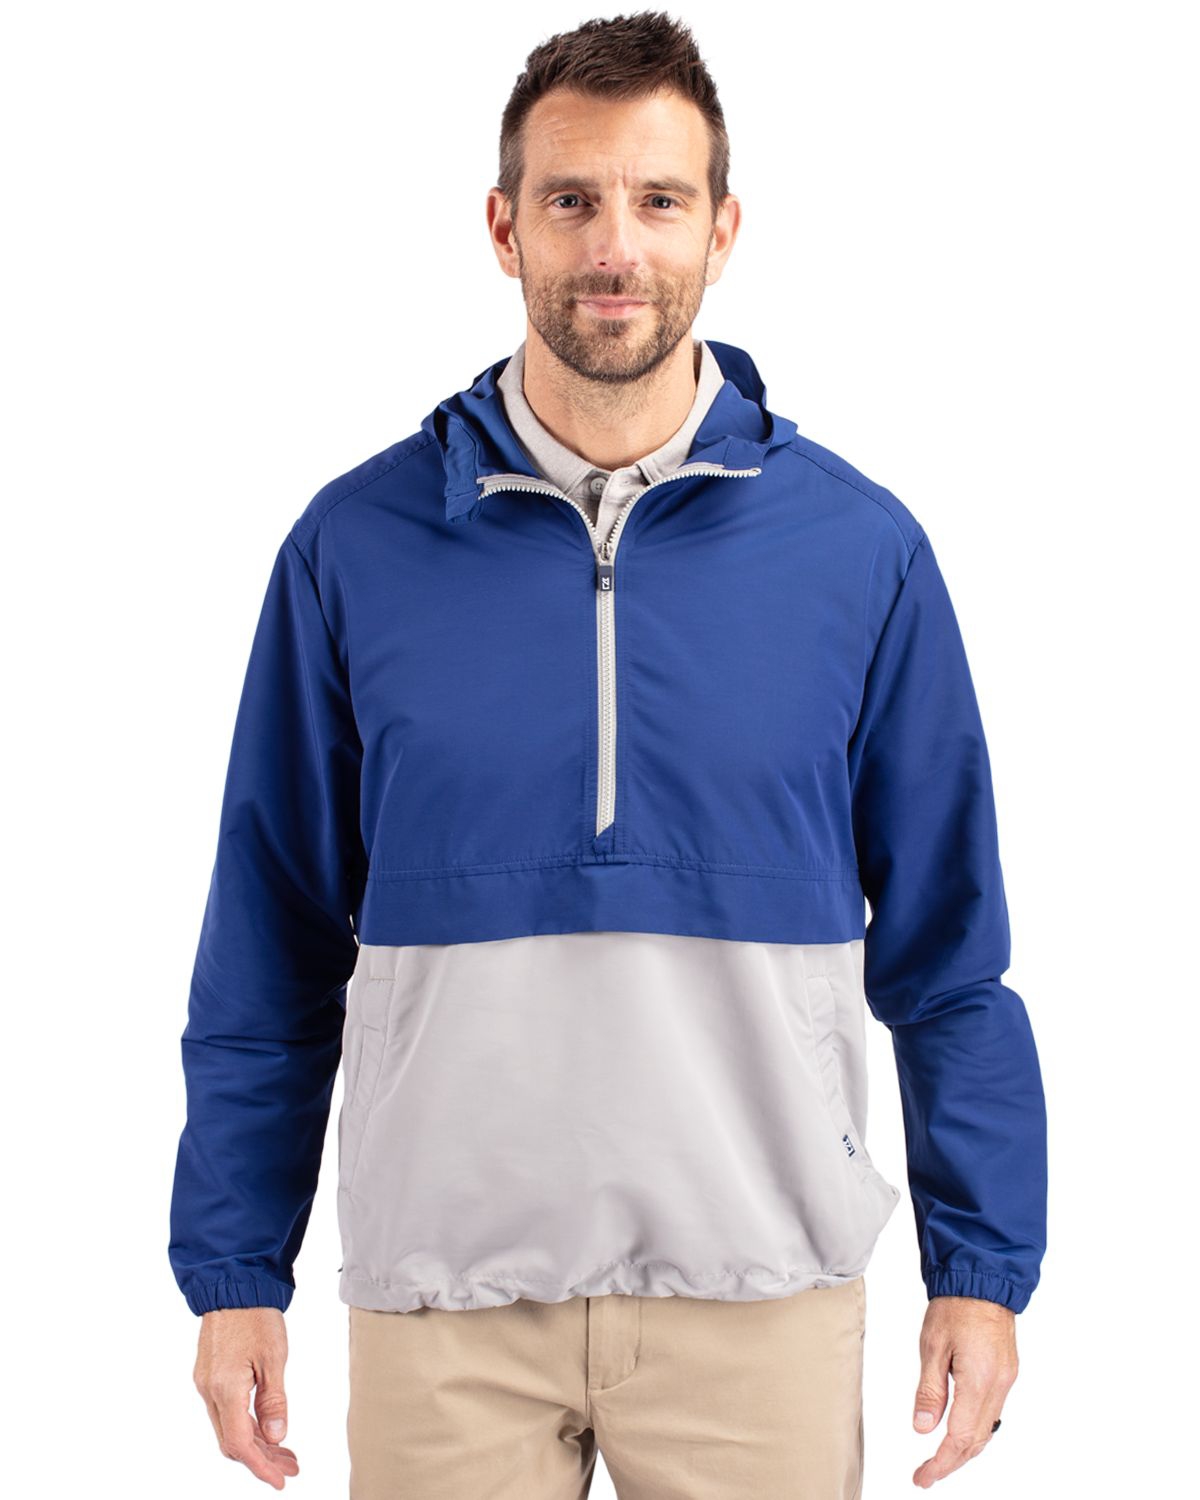 Cutter Buck Charter Eco Knit Recycled Mens Anorak Jacket - Tour blue/polished